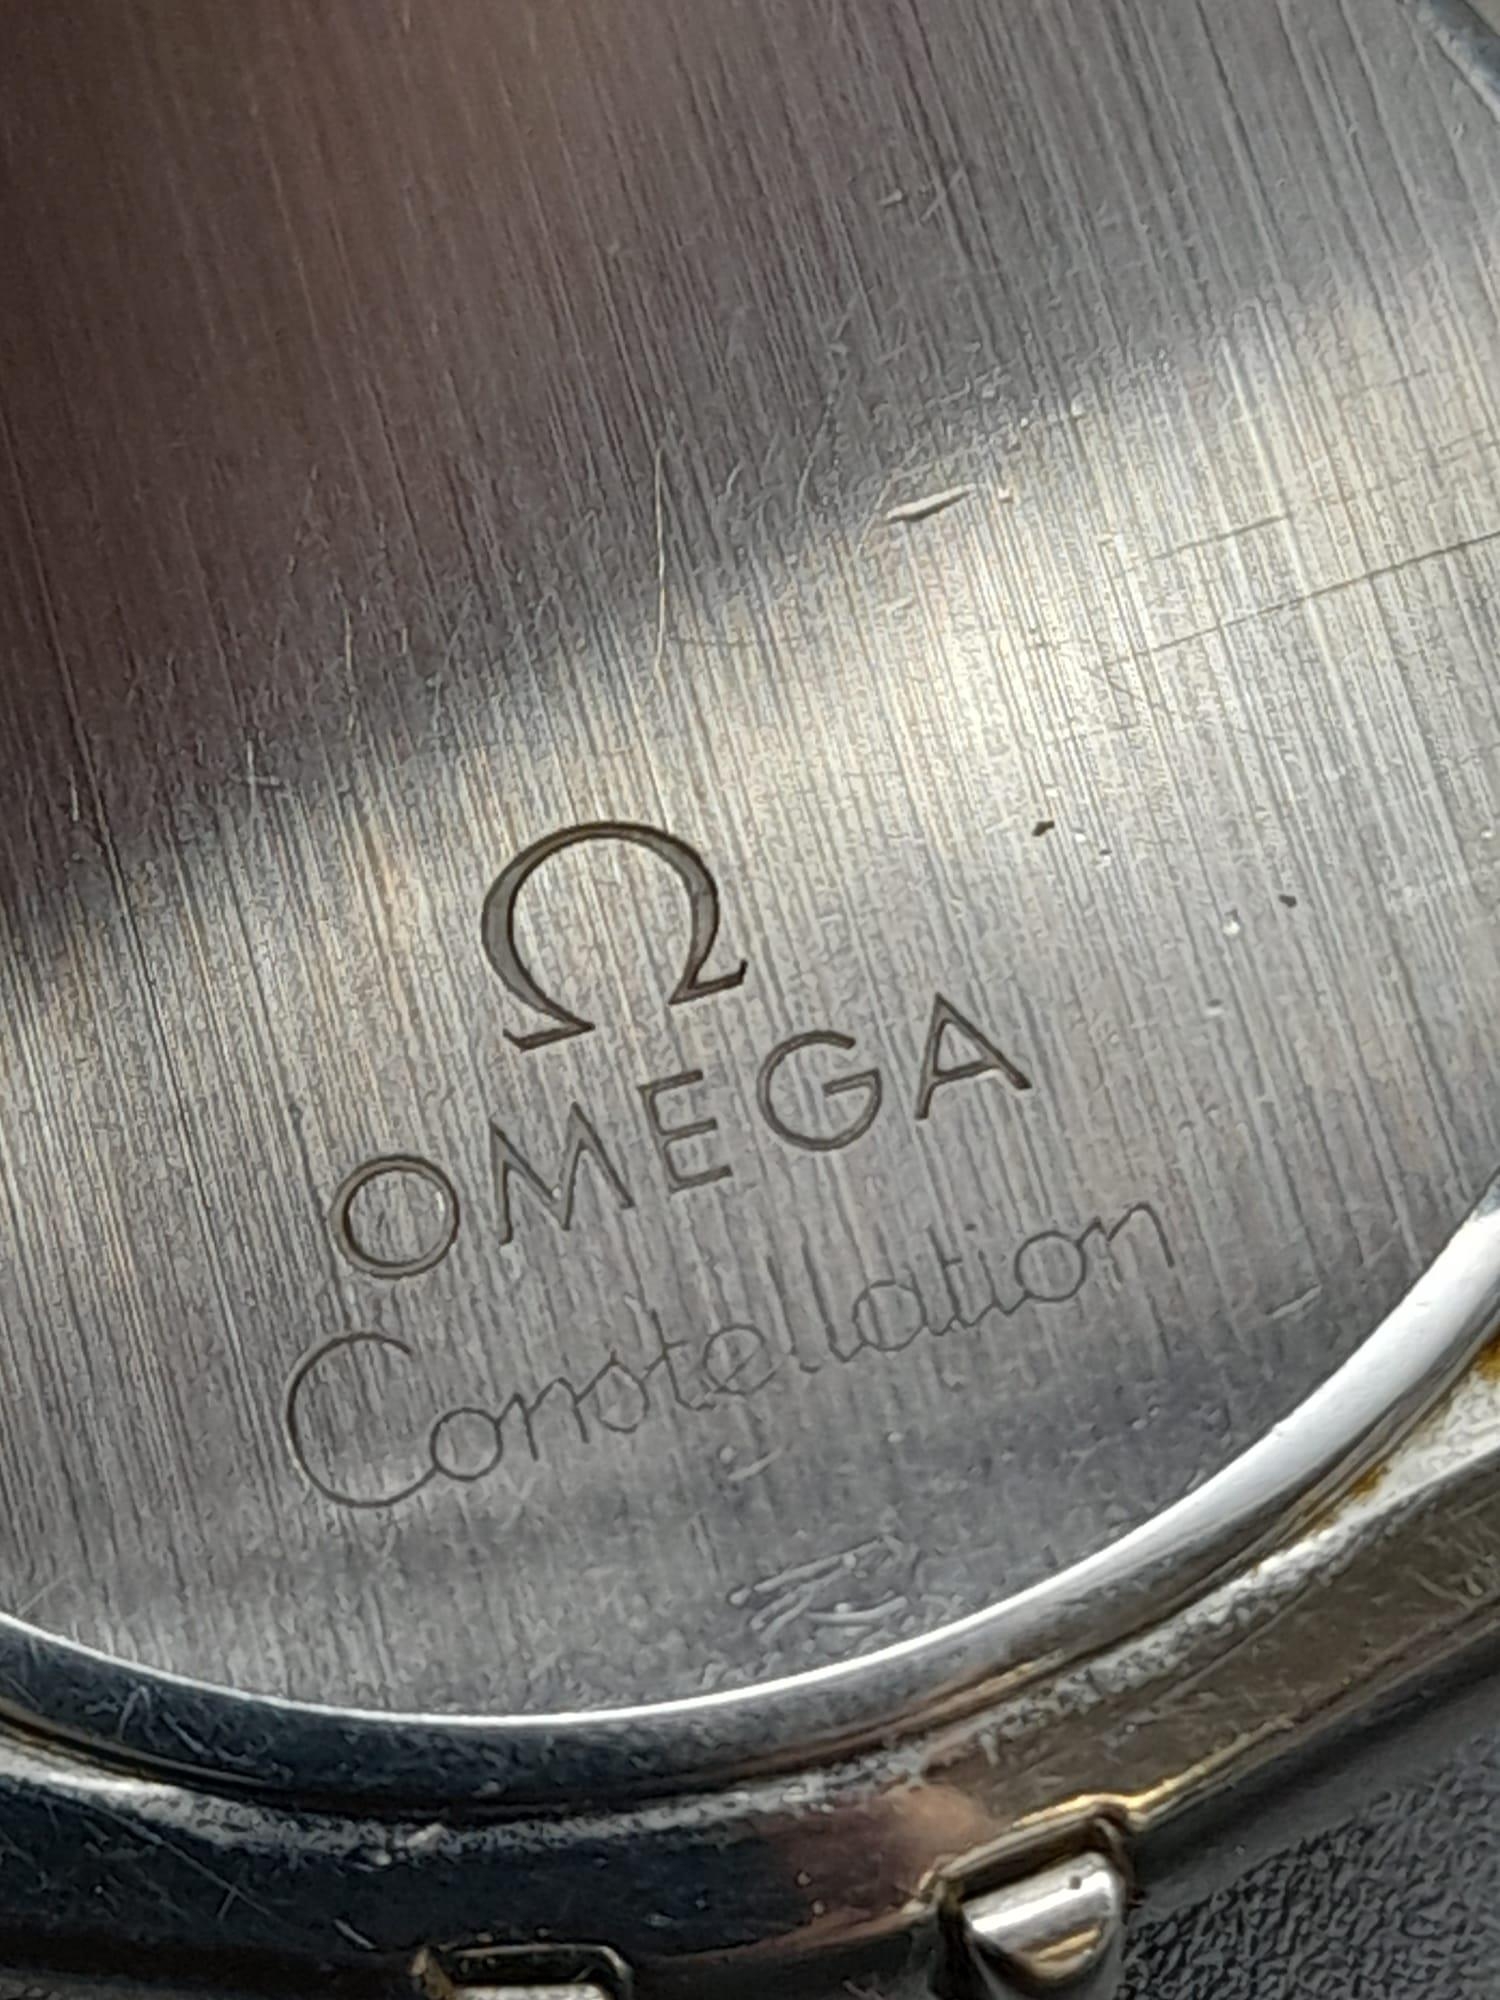 OMEGA CONSTELATION QUARTZ BRACELET WATCH WITH ORIGINAL BOX AND PAPERS. 32mm. Needs batteries. - Image 11 of 13